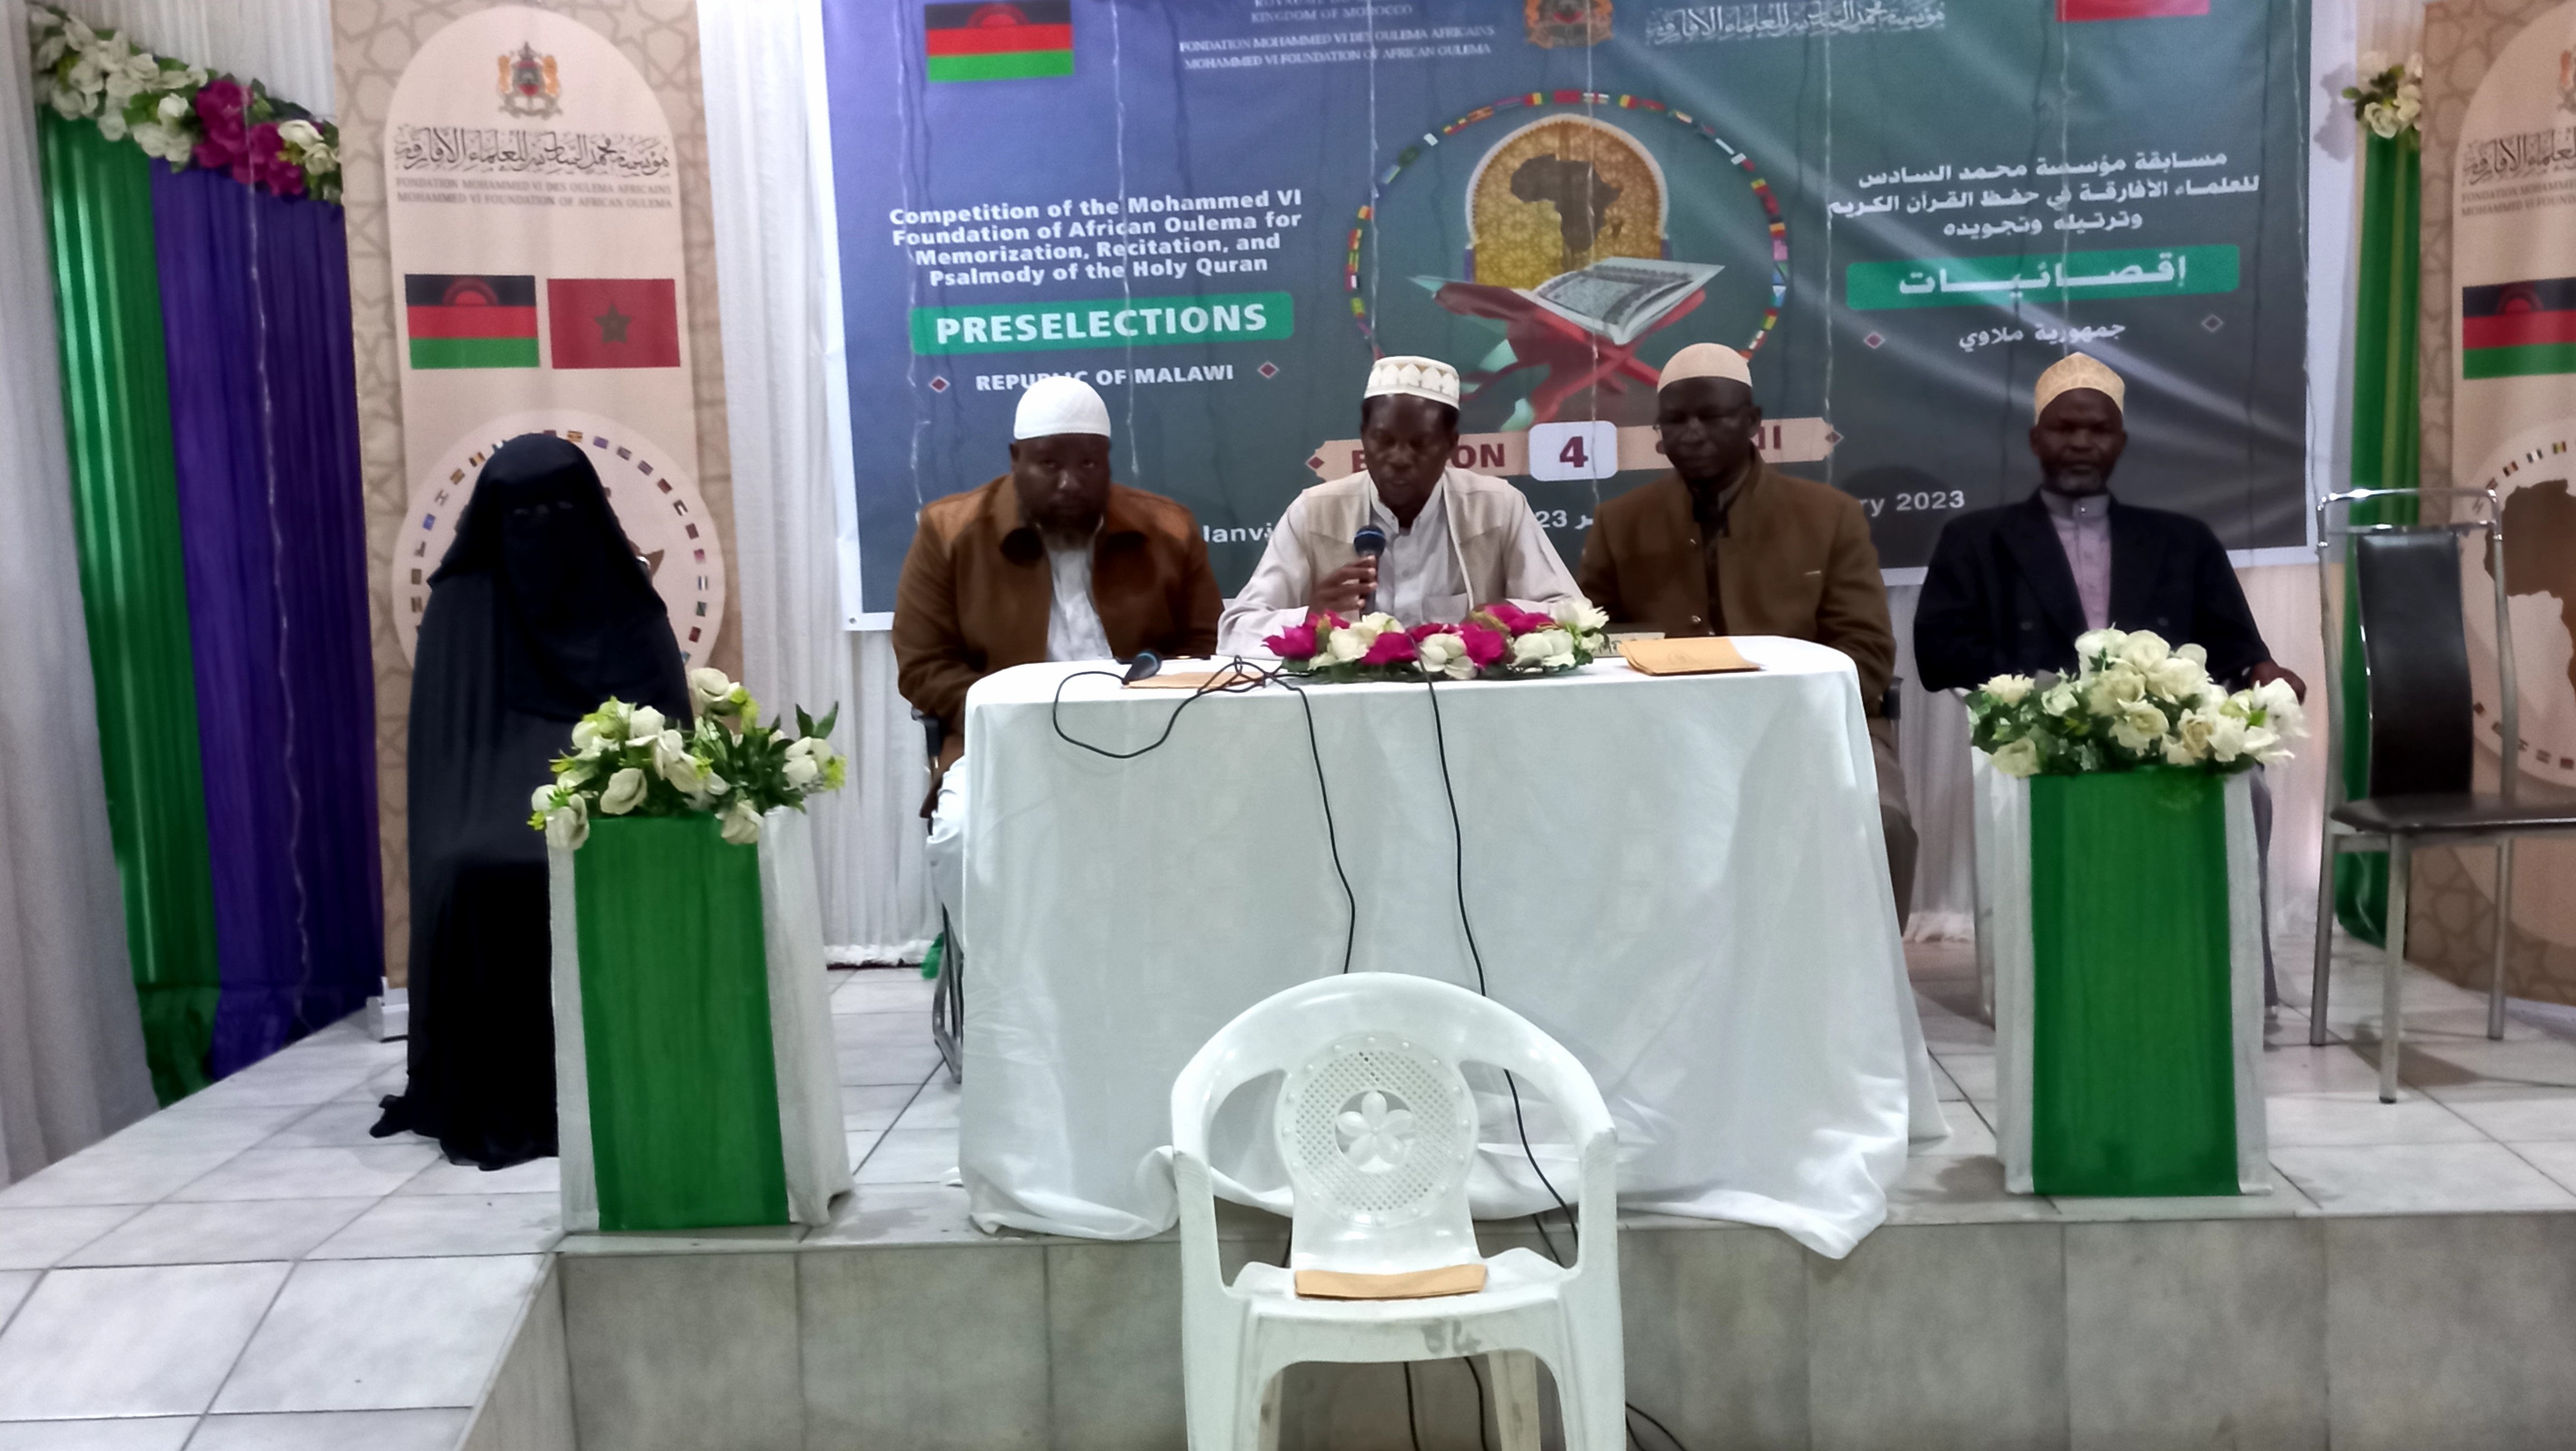 Majilis Ullamah Council of Malawi Commends Quran Competitions